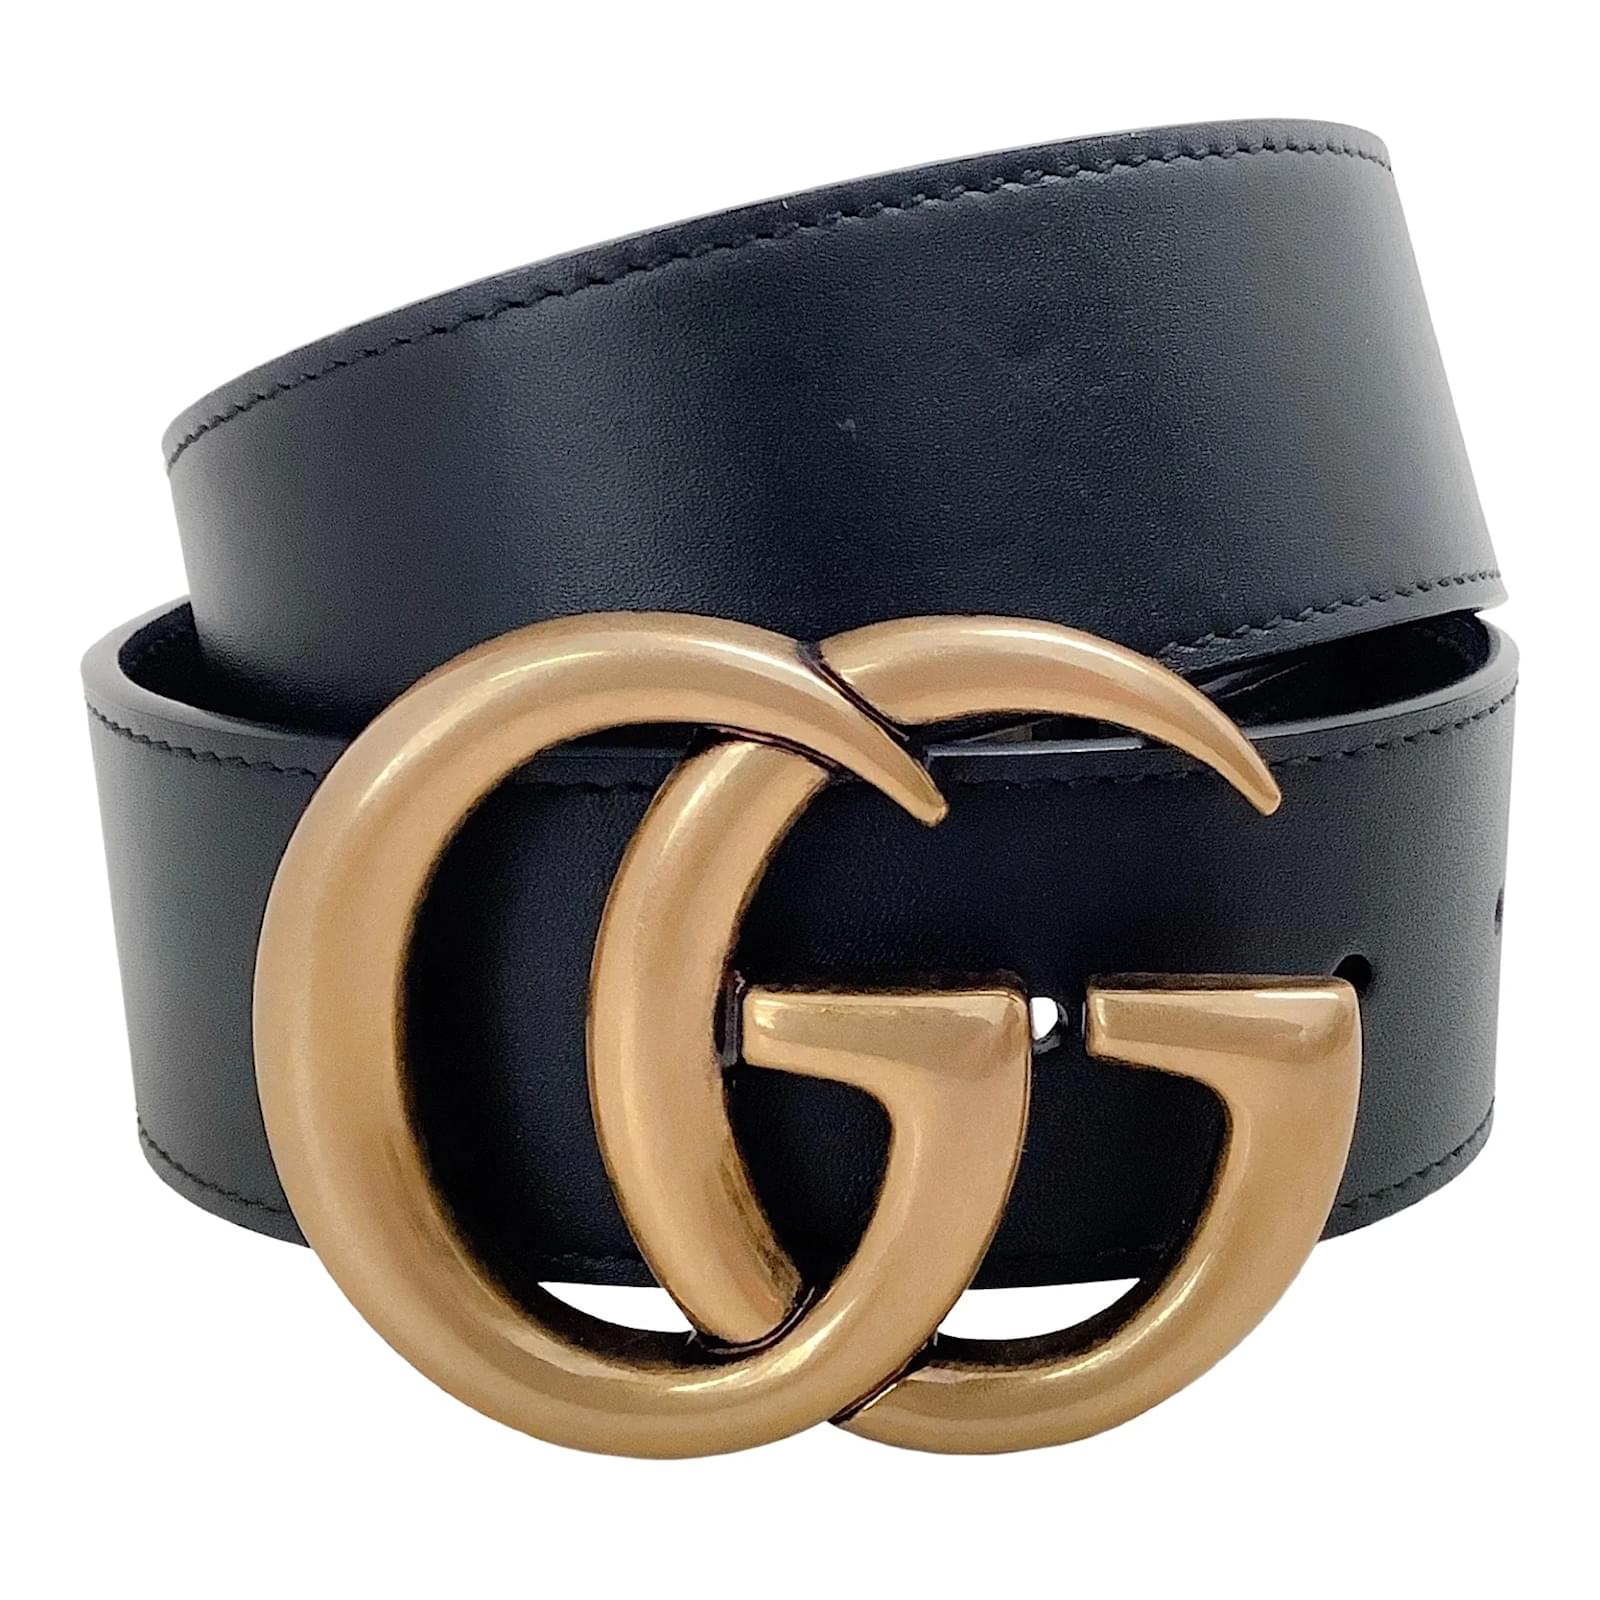 Leather belt with Double G buckle